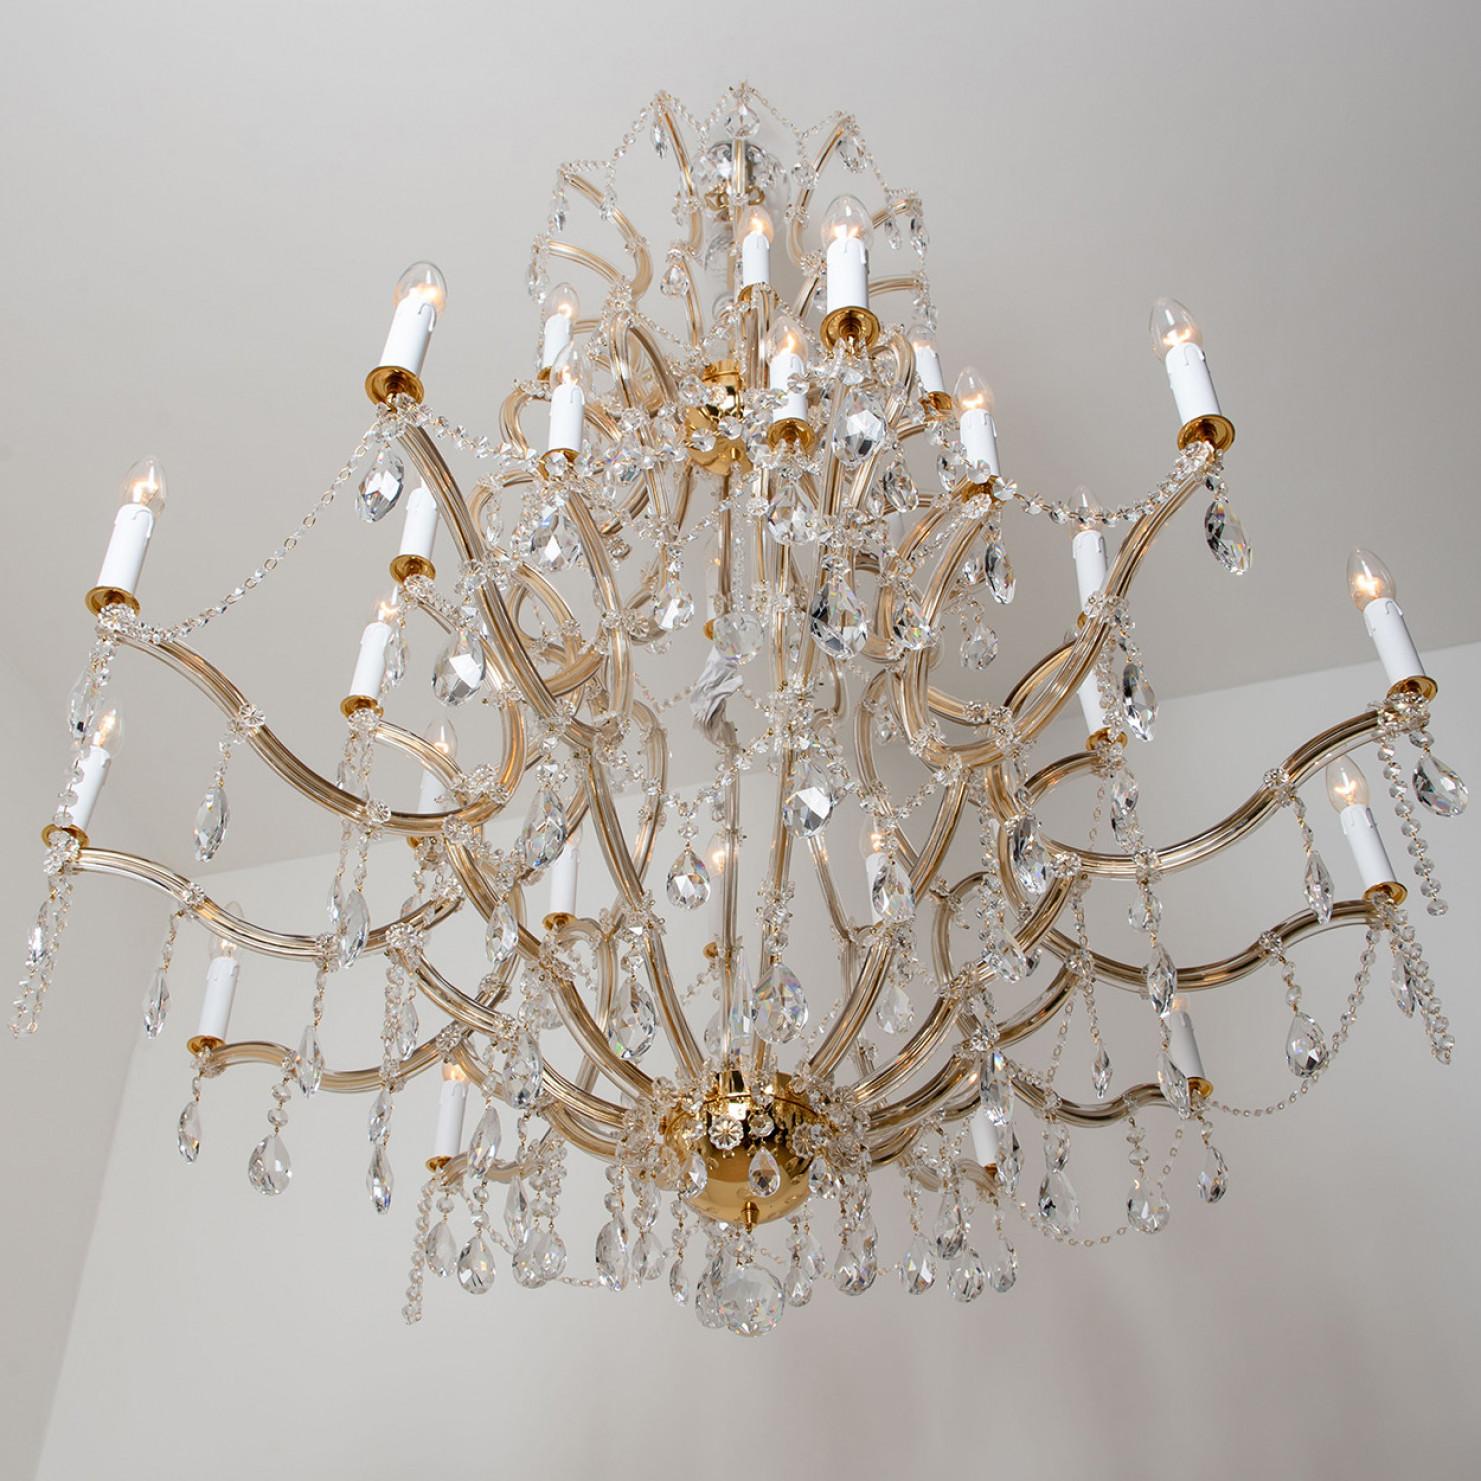 German High-End XL Maria Theresa Gold Plated Swarovski Chandelier For Sale